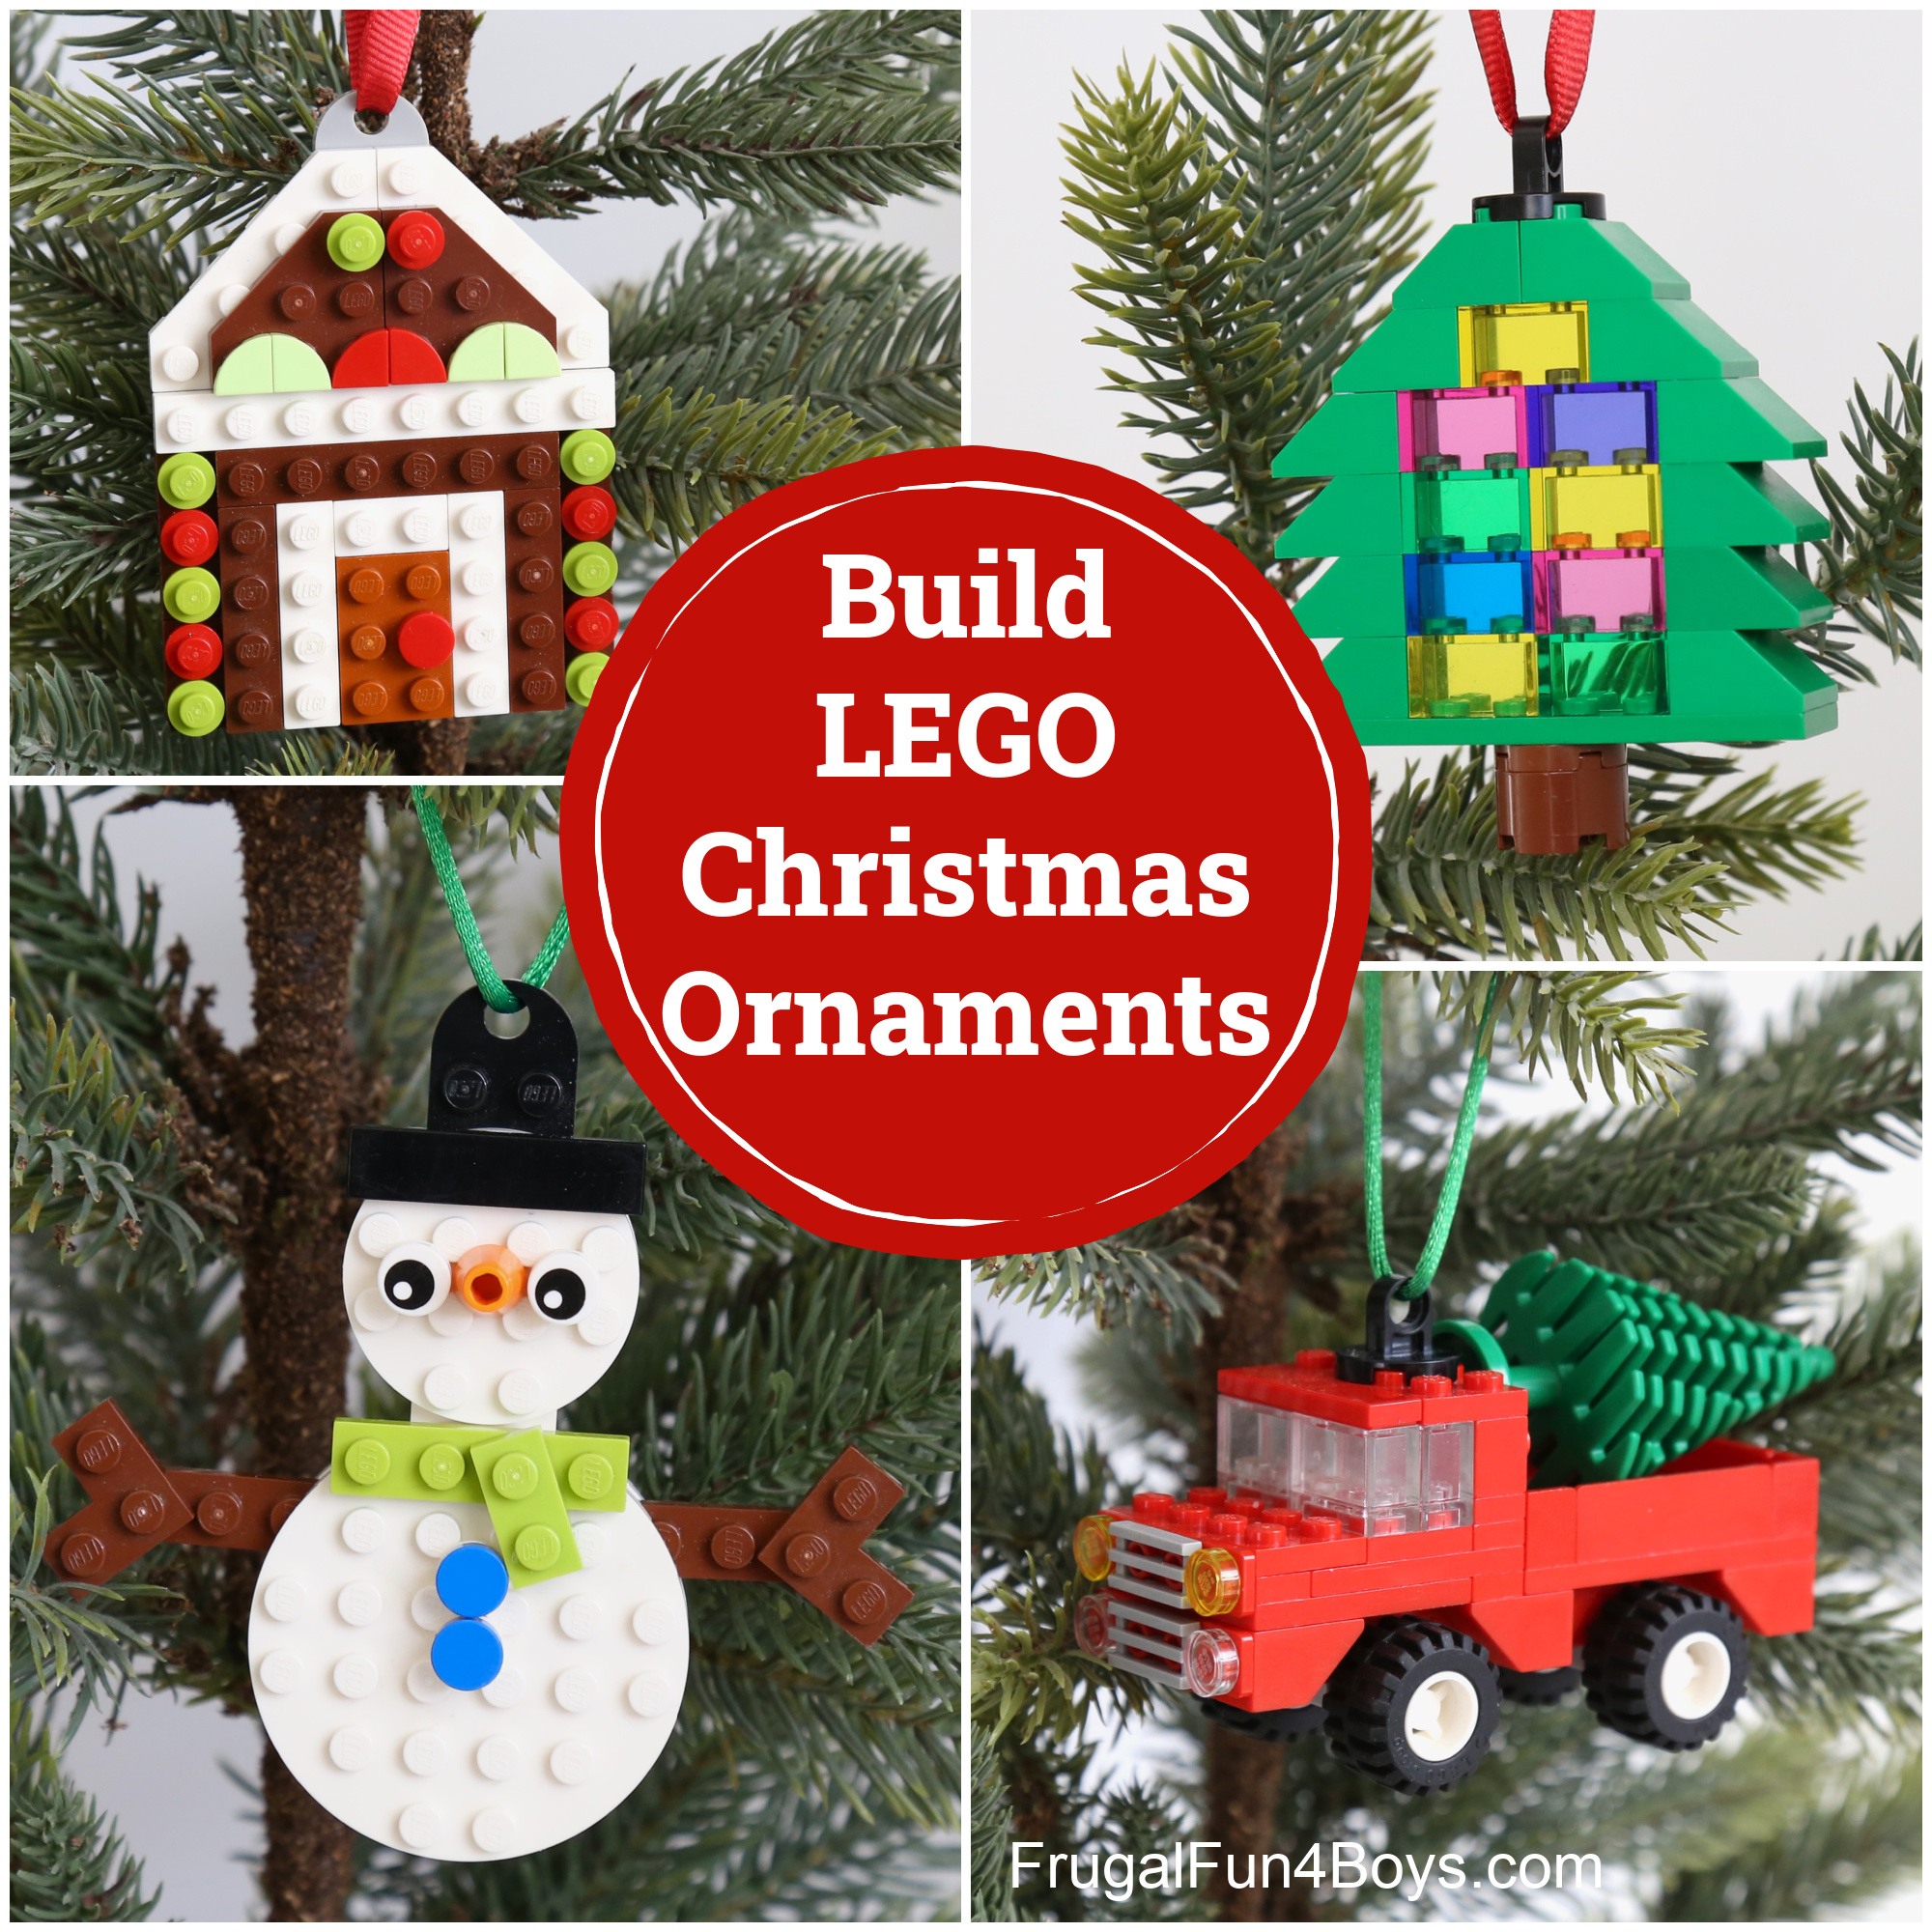 Build LEGO Christmas Ornaments - tree, gingerbread house, snowman, classic truck